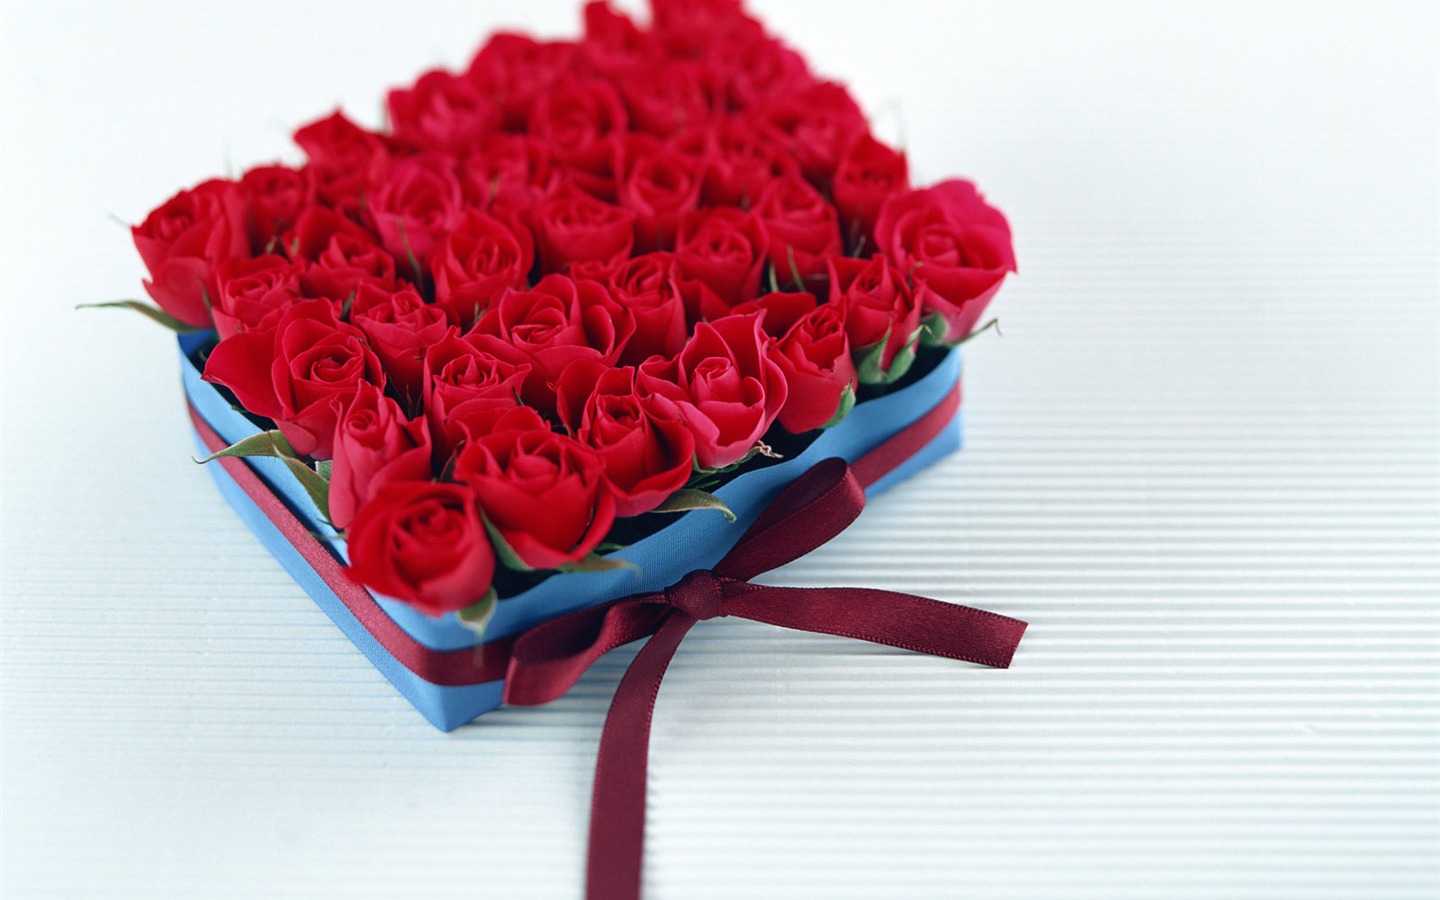 Flowers and gifts wallpaper (1) #13 - 1440x900